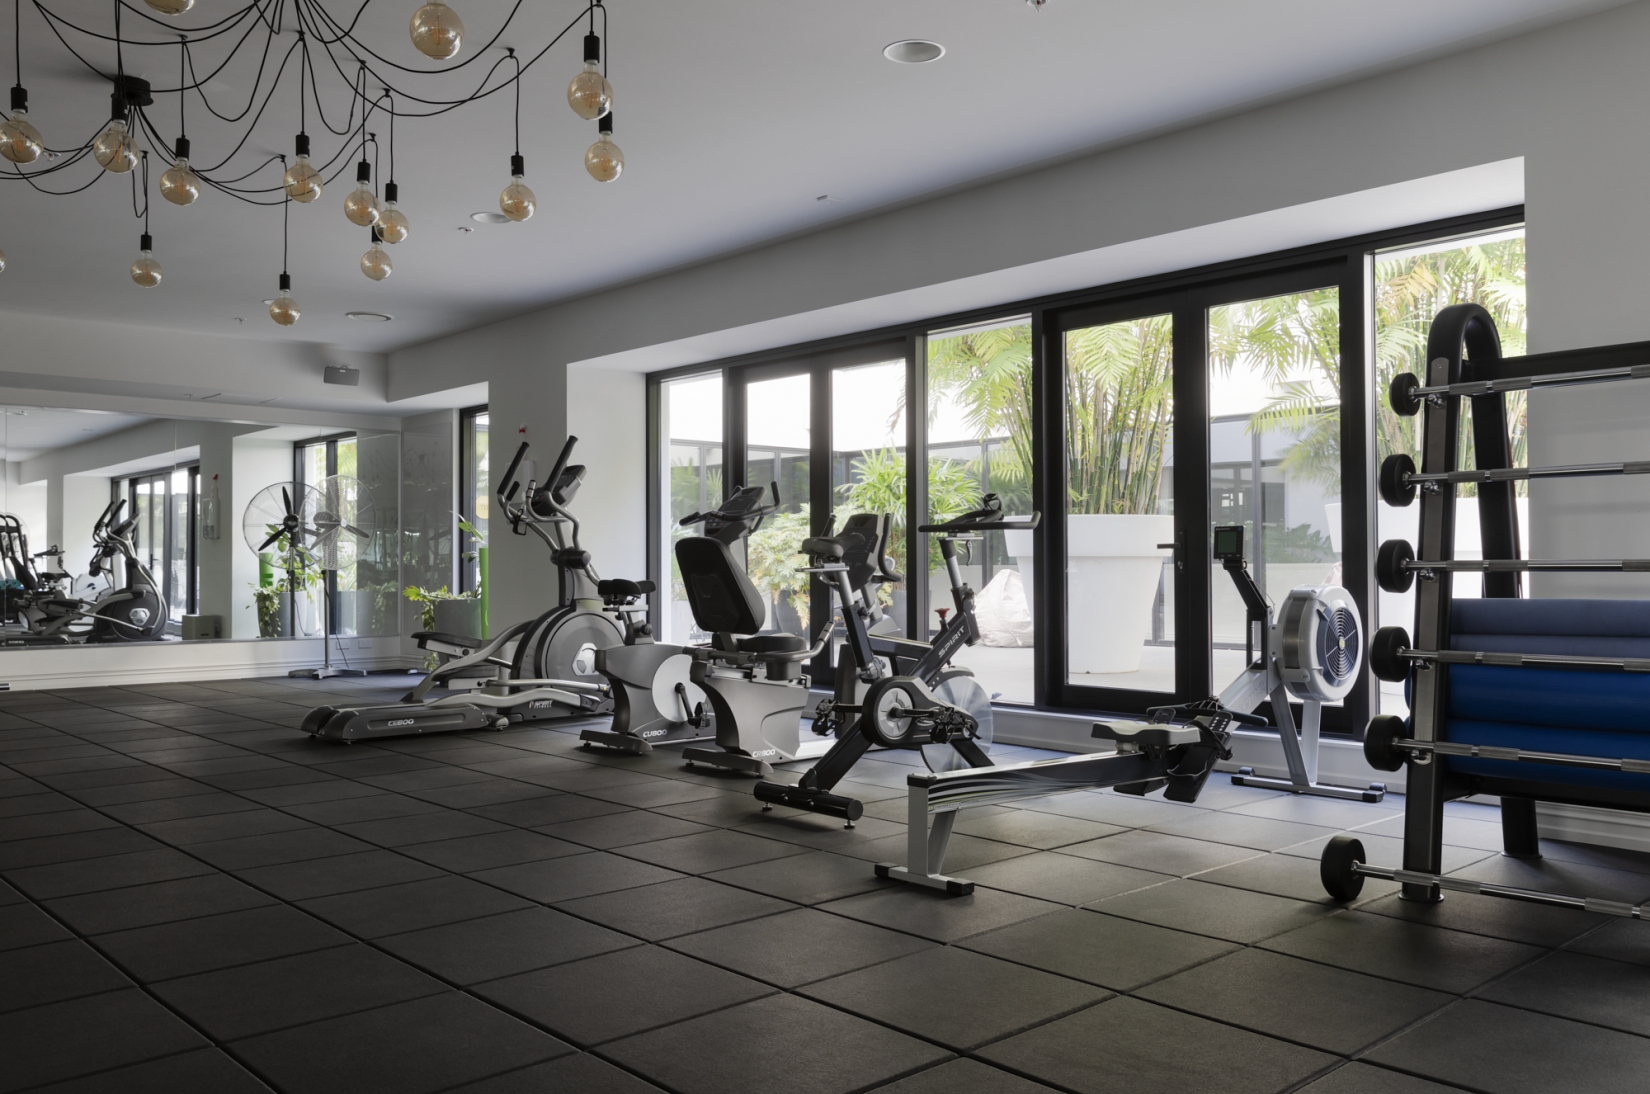 High Impact Gym Tile Apartments Hotels